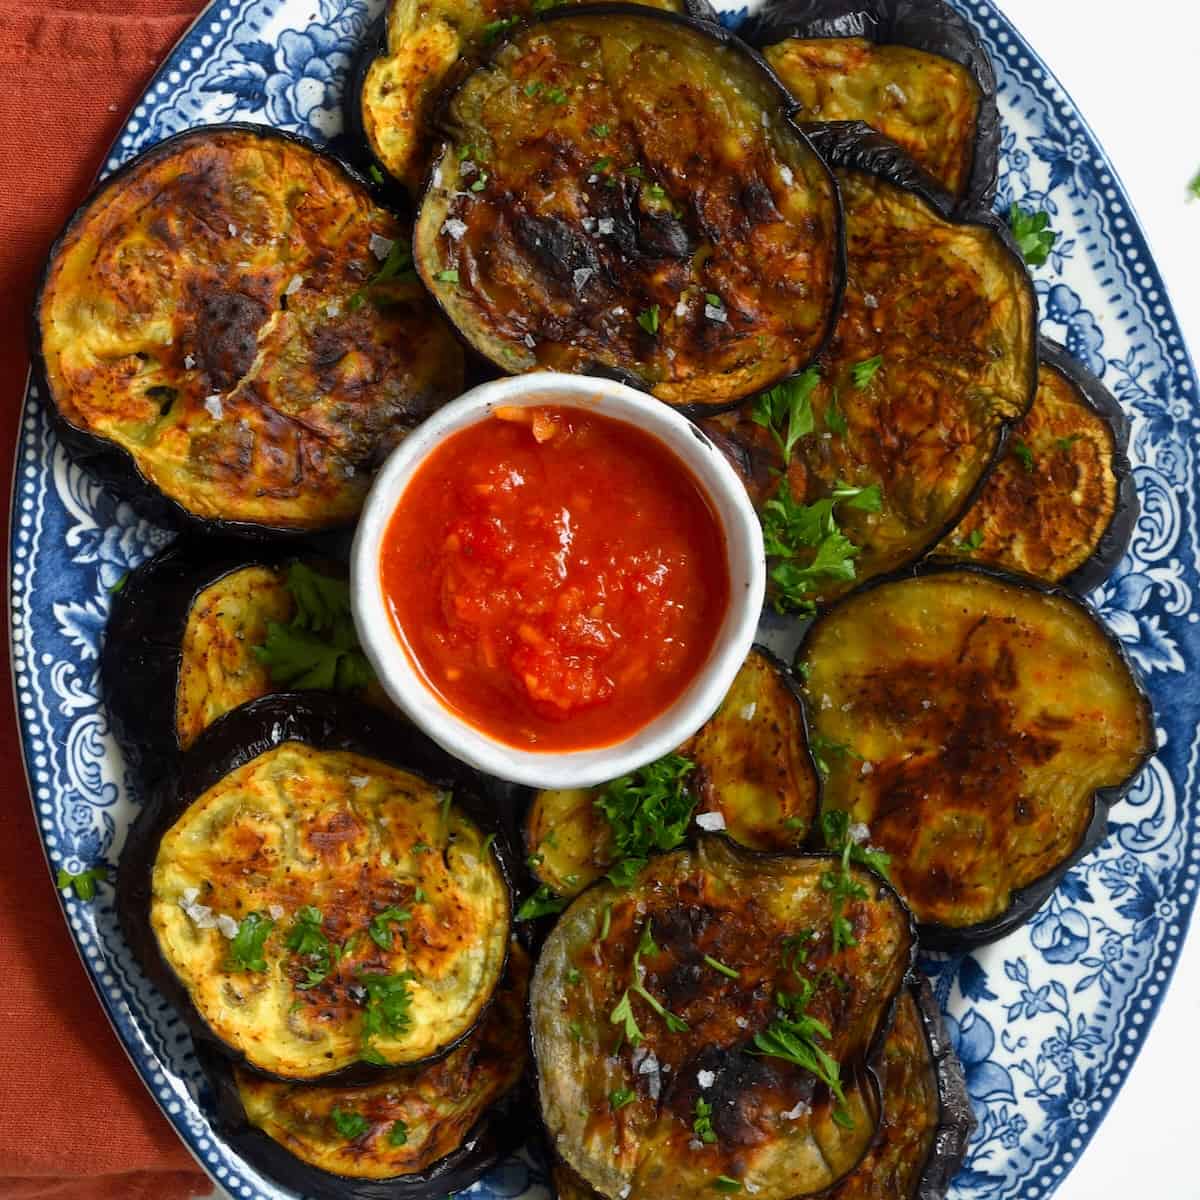 Roasted eggplant slices and tomato sauce on a plate